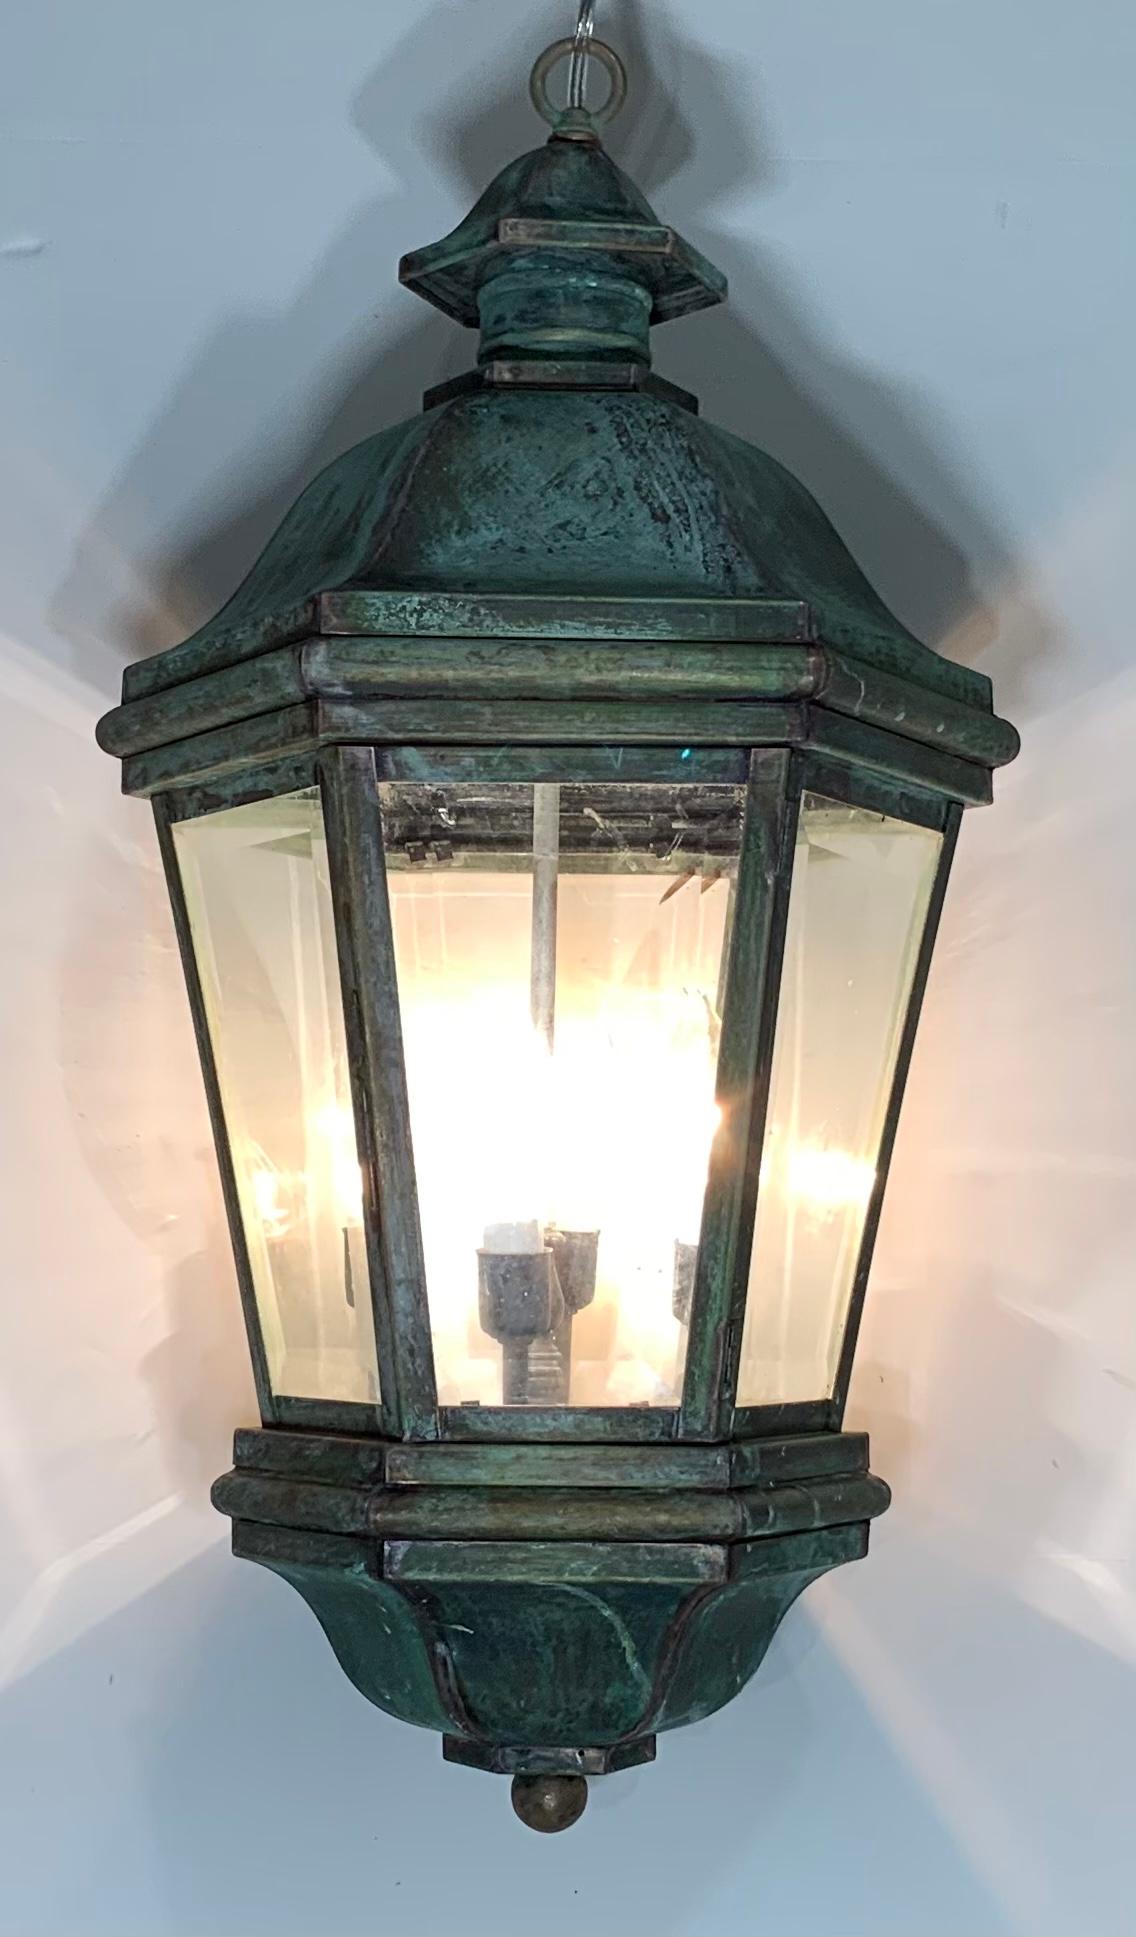 Elegant handcrafted lantern made of solid brass with great green patina color, six sides of beveled glass.
Electrified with Four 40/watt lights, good for wet locations, although could be used also as decorative indoor light. Canopy included.